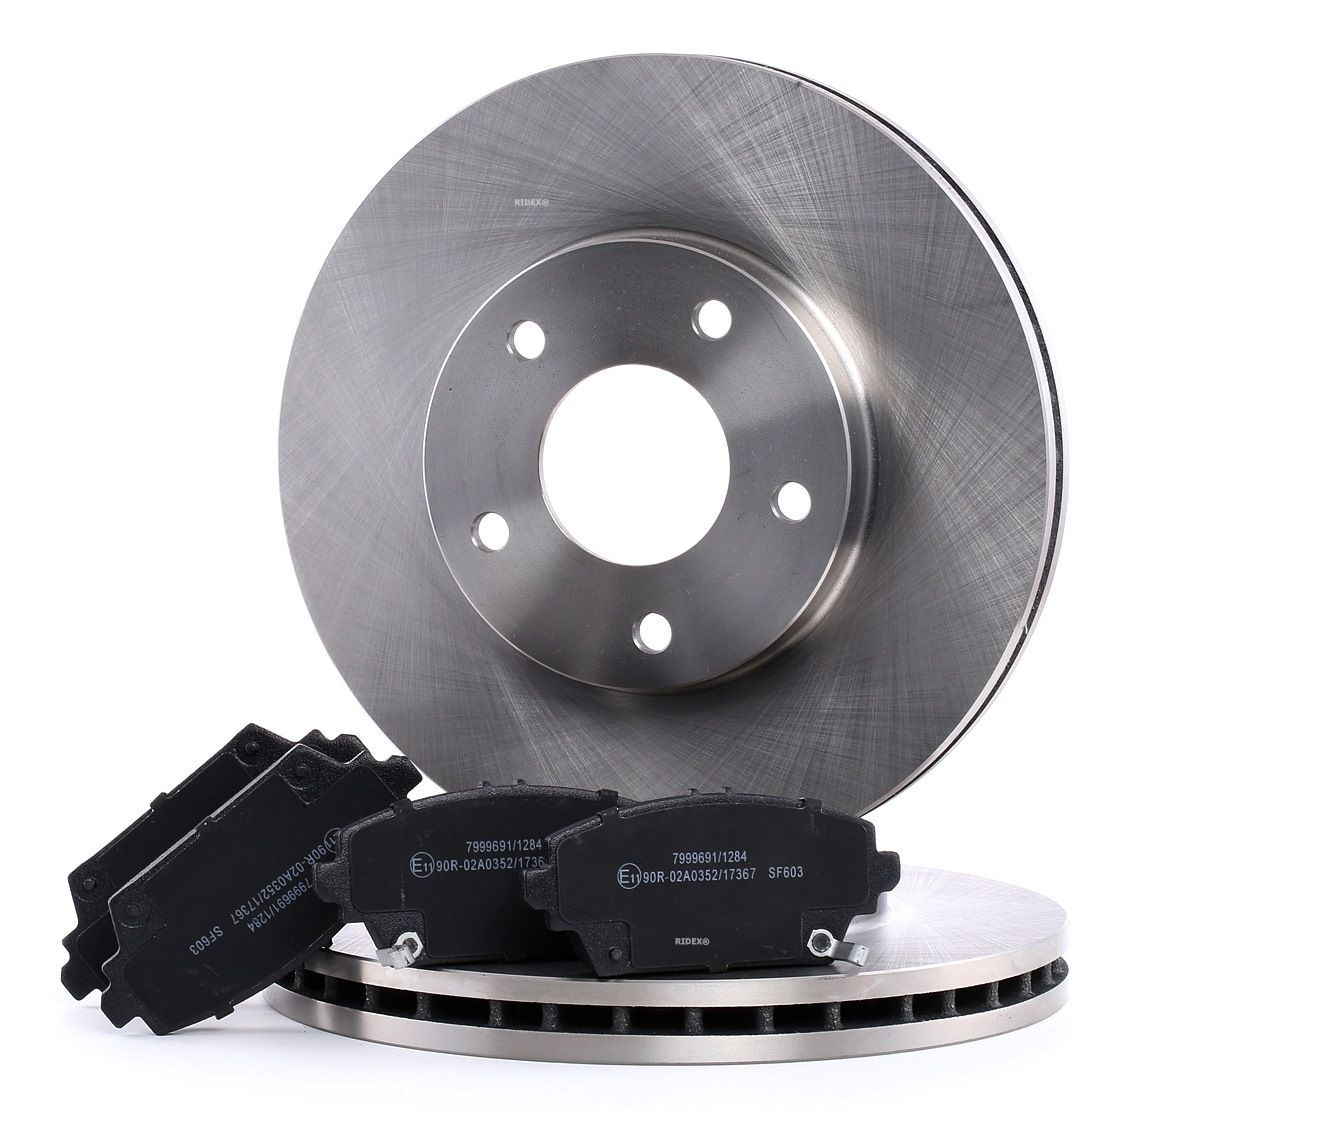 RIDEX 3405B0164 Brake discs and pads set Front Axle, Vented, with acoustic wear warning